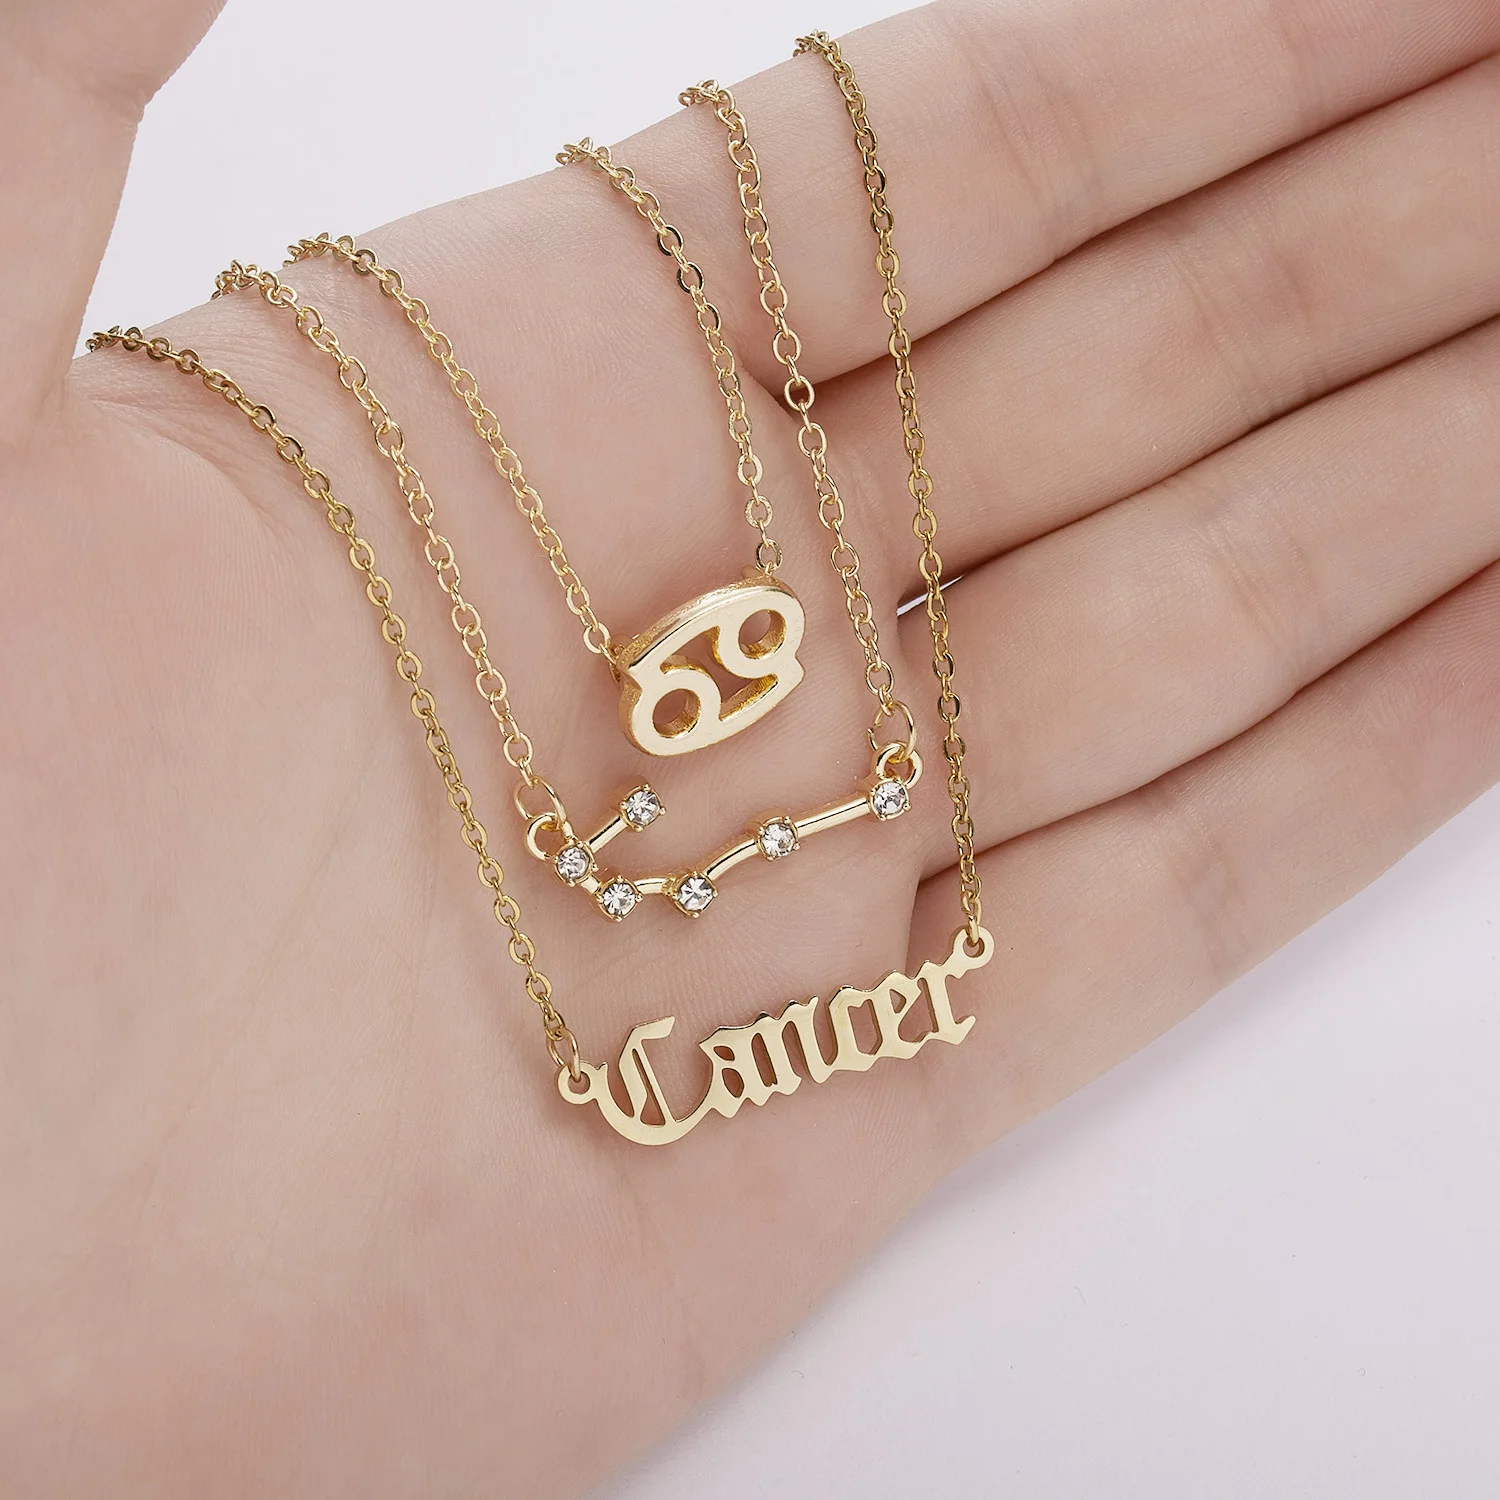 

Gold Necklace 3Pcs/Set Cardboard Star Zodiac Sign Pendant 12 Constellation Charm Aries Cancer Leo Scorpio Necklace Jewelry Gifts